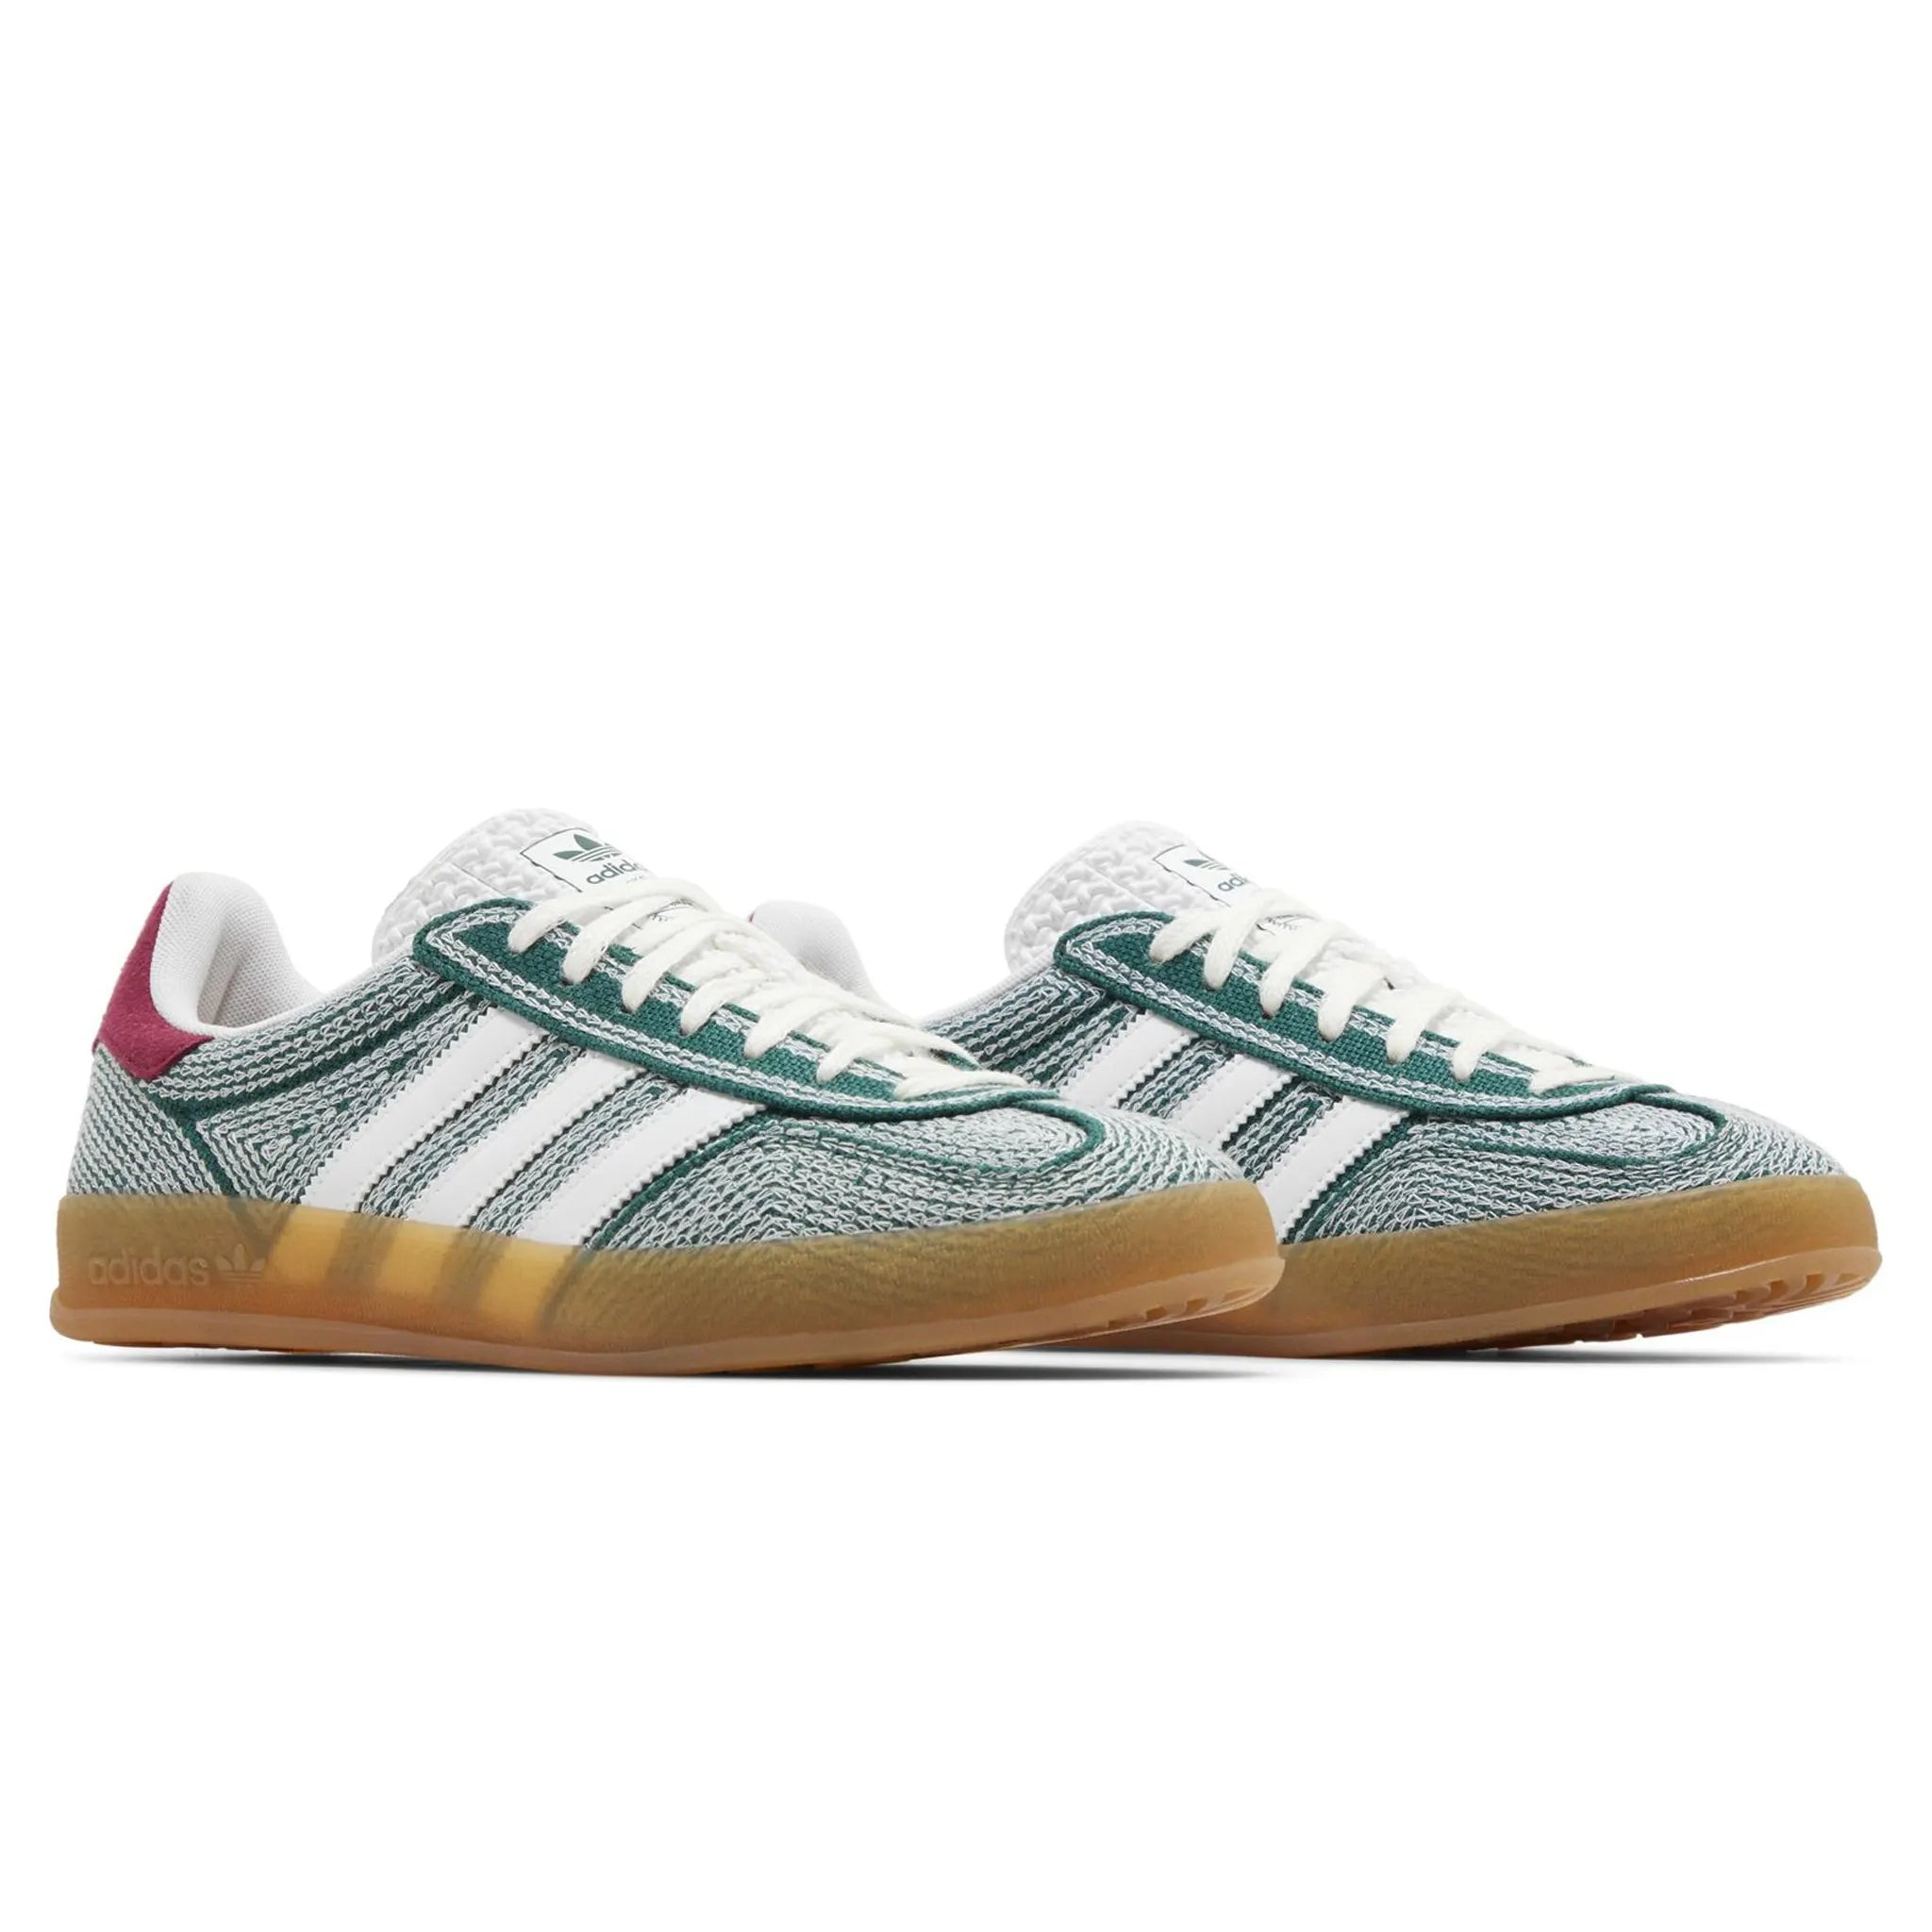 Front side view of Adidas Gazelle Indoor Sean Wotherspoon Hemp Green IG1456